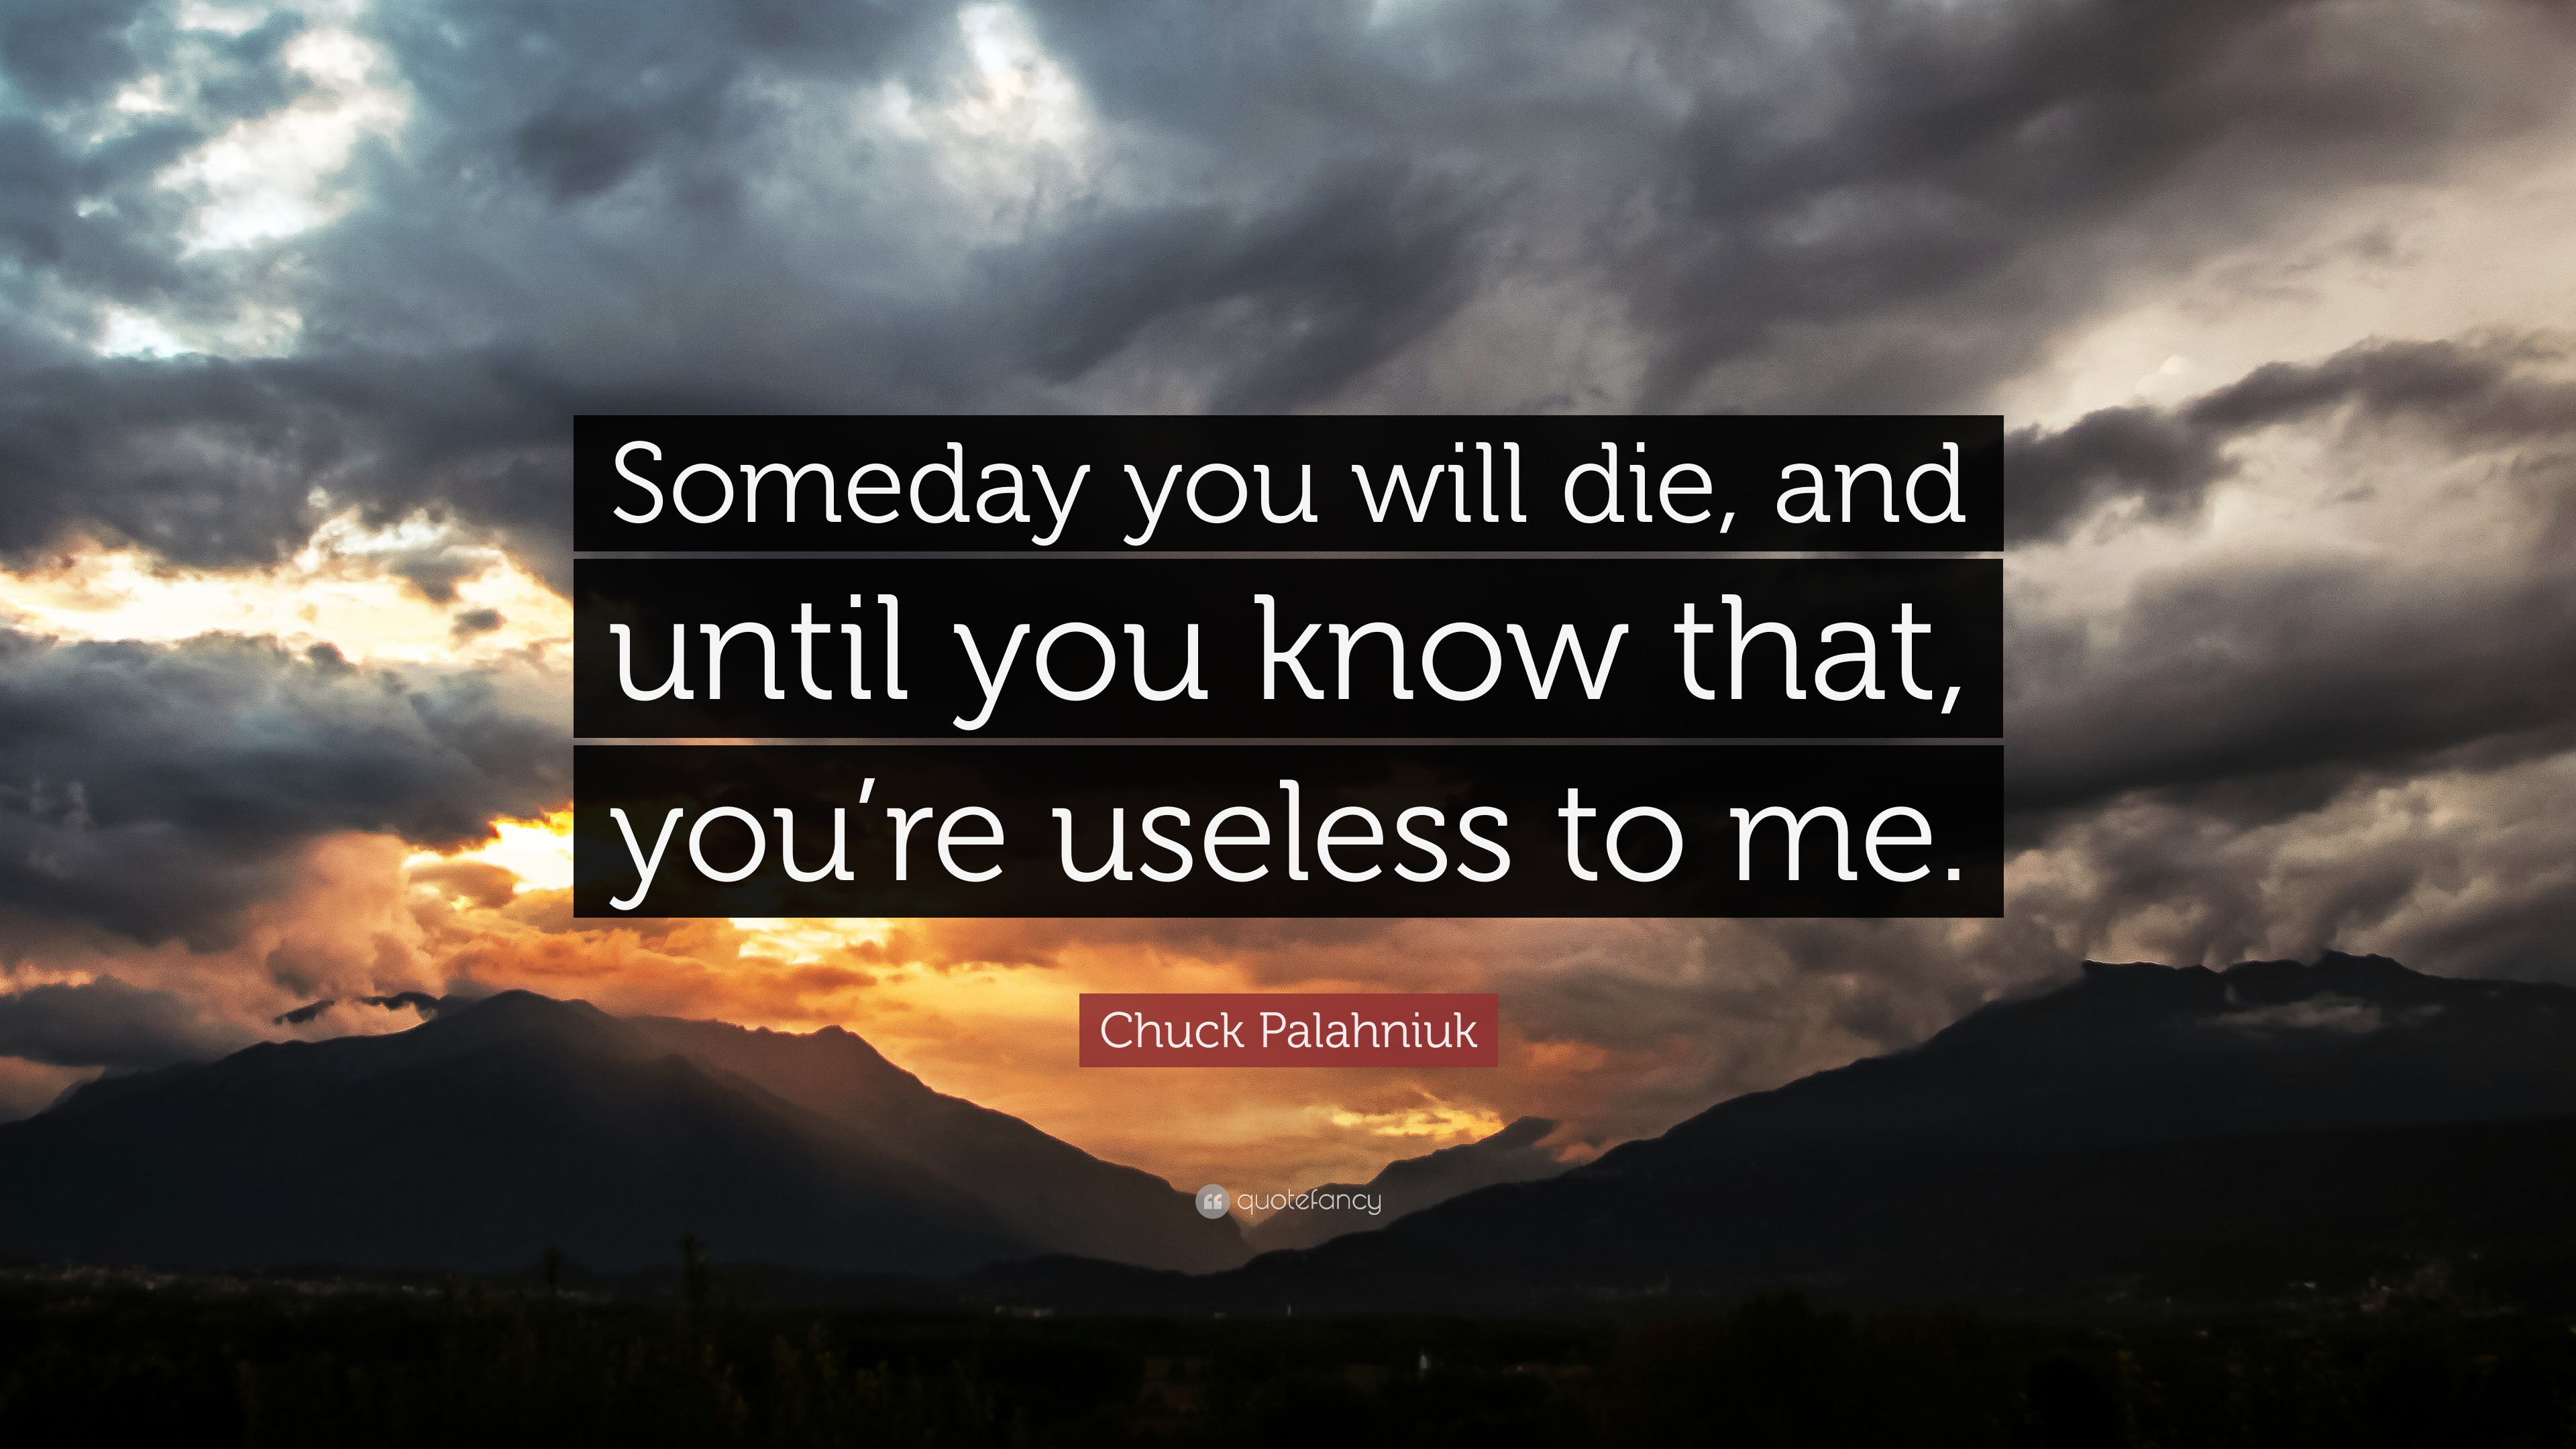 Chuck Palahniuk Quote: “Someday you will die, and until you know that ...